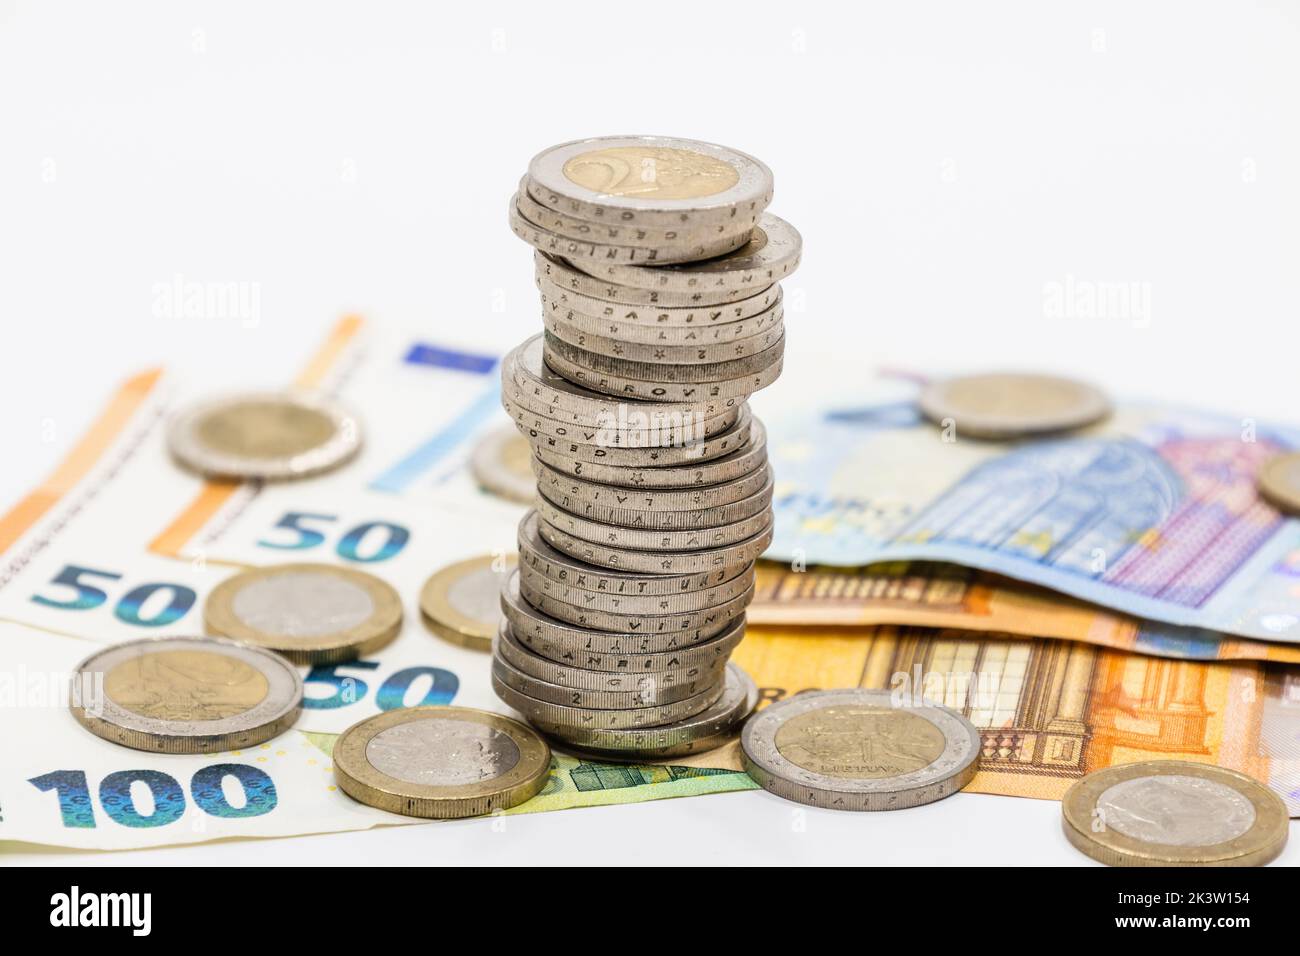 The pile of euro coins on euro notes. Euro banknotes and coins Stock Photo